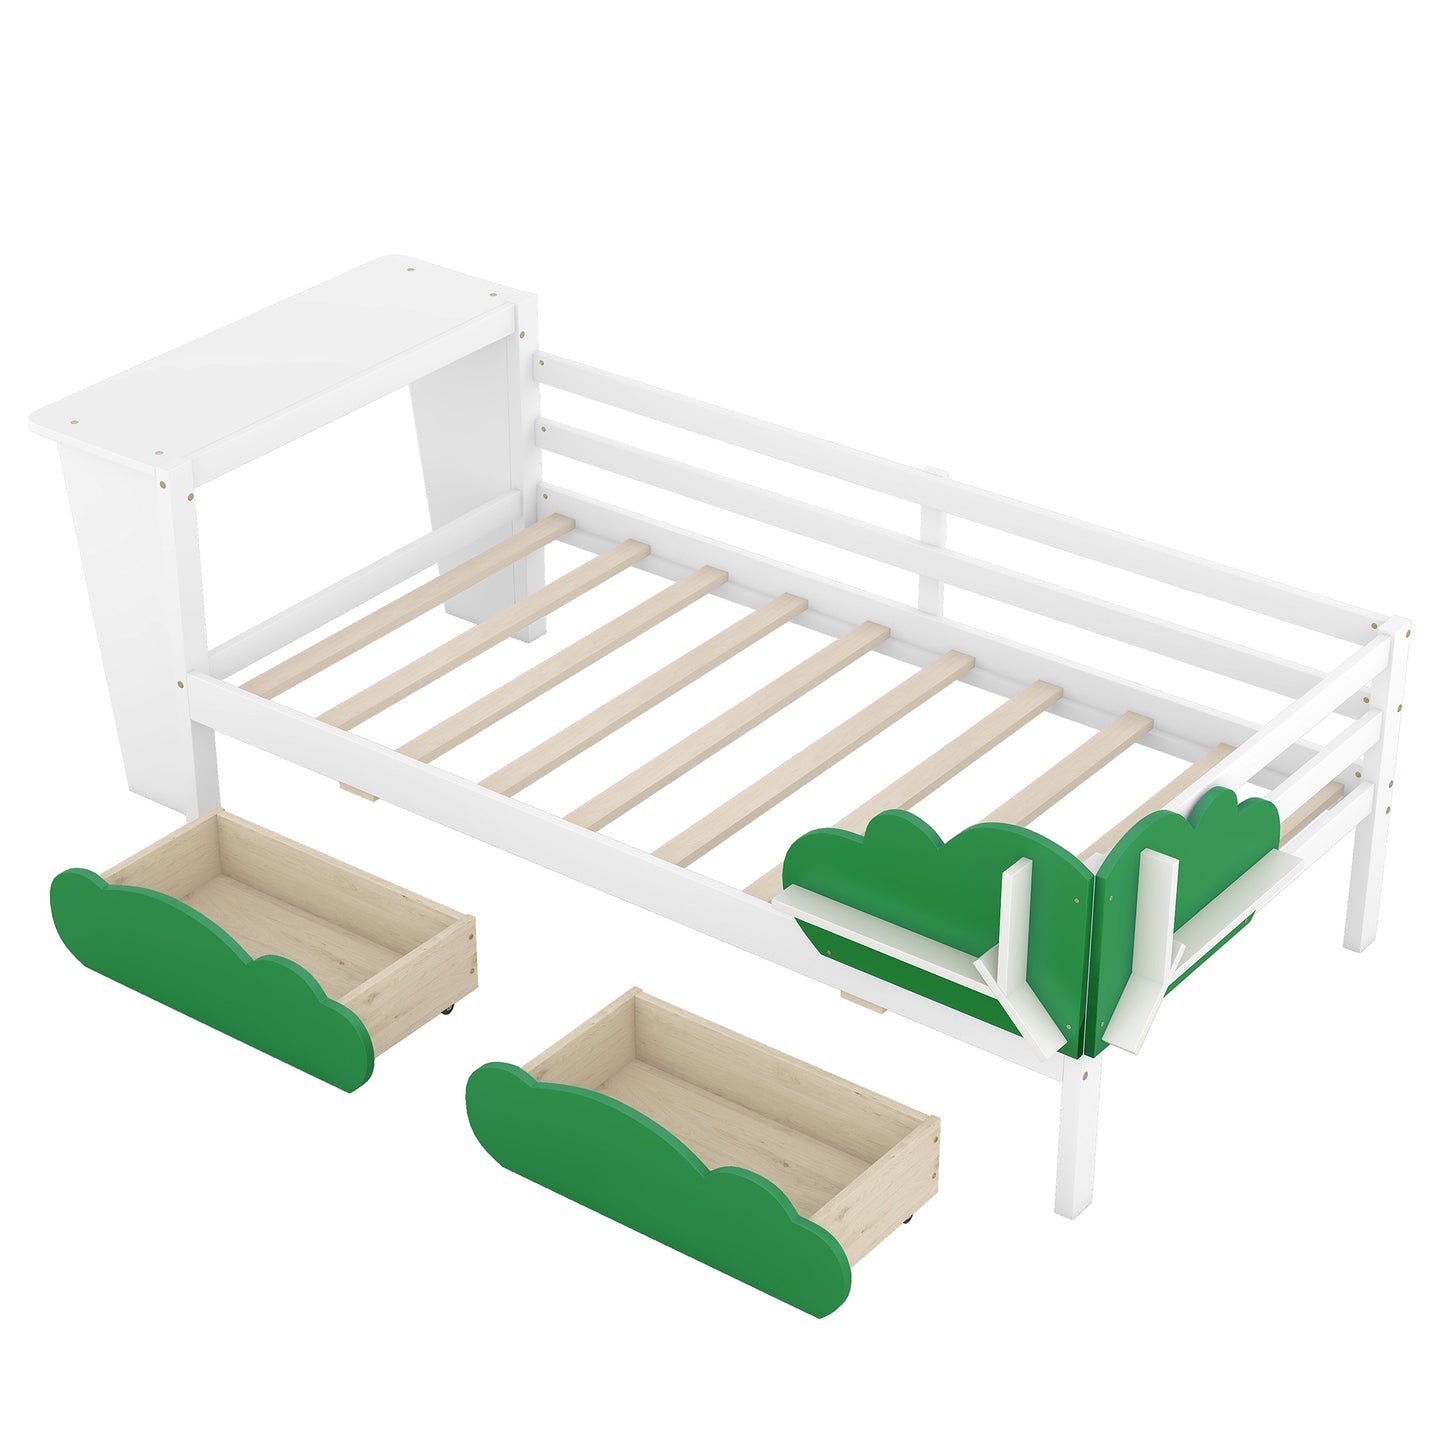 Twin Size Daybed with Desk, Green Leaf Shape Drawers and Shelves, White